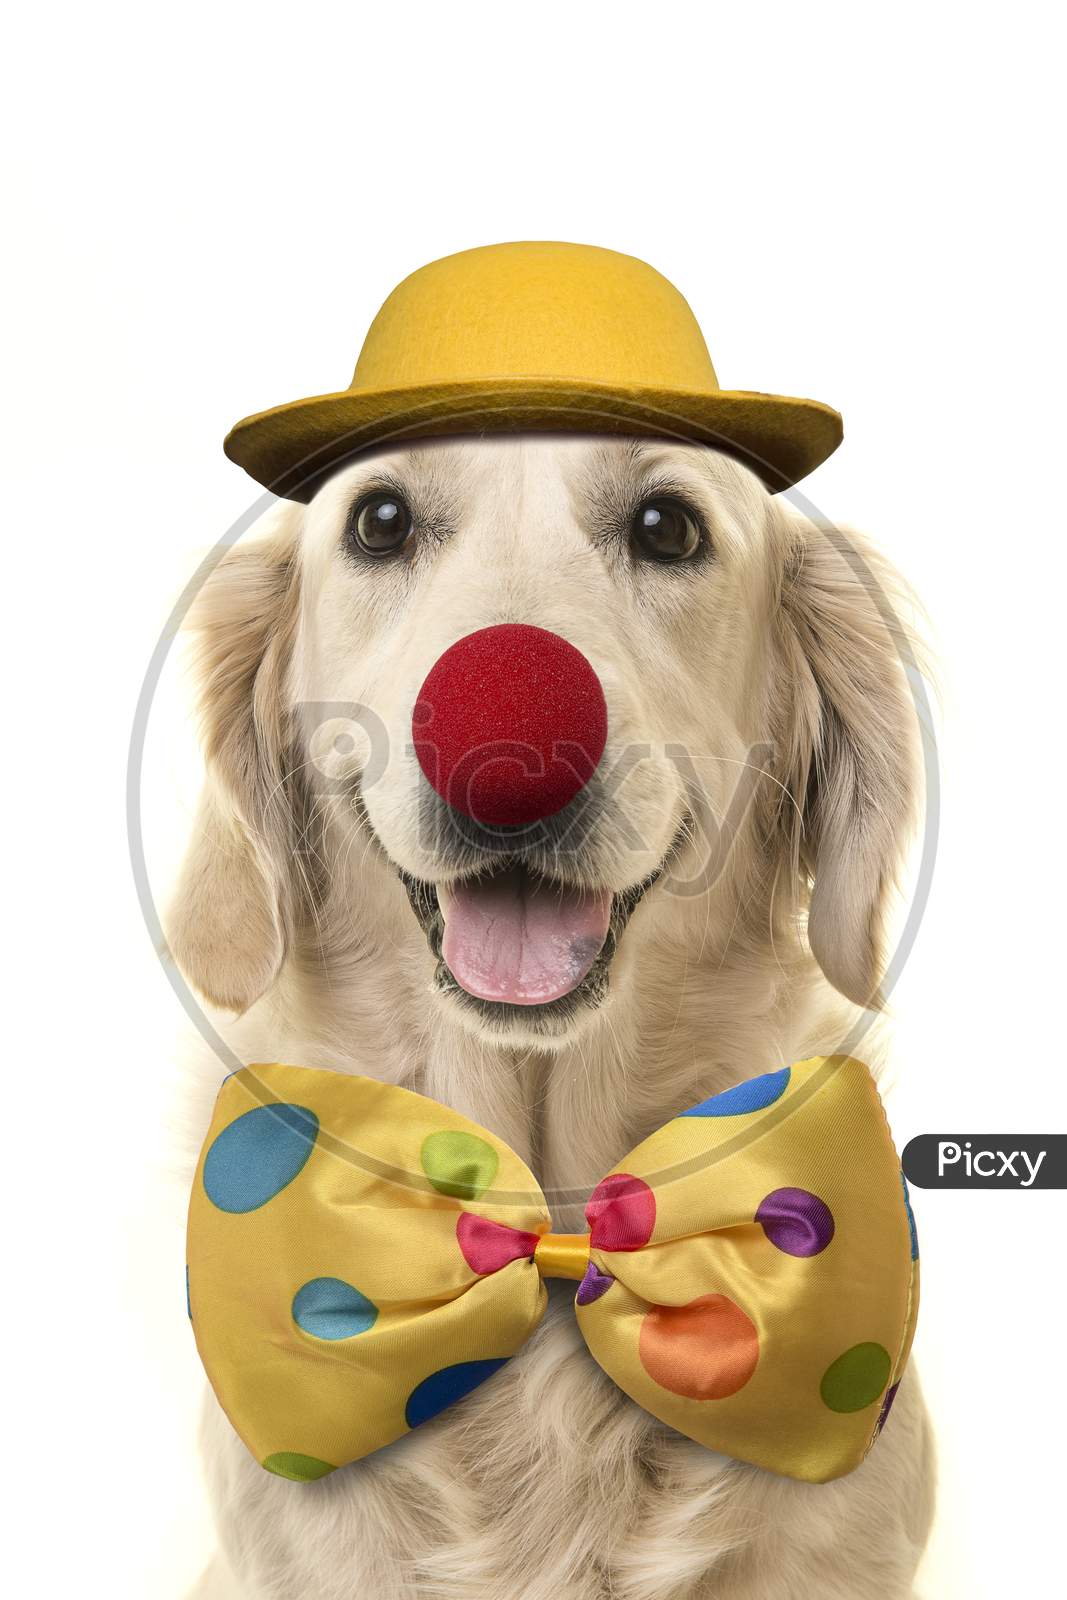 Golden Retriever With A Big Smile Dressed Up As A Clown On A White Background